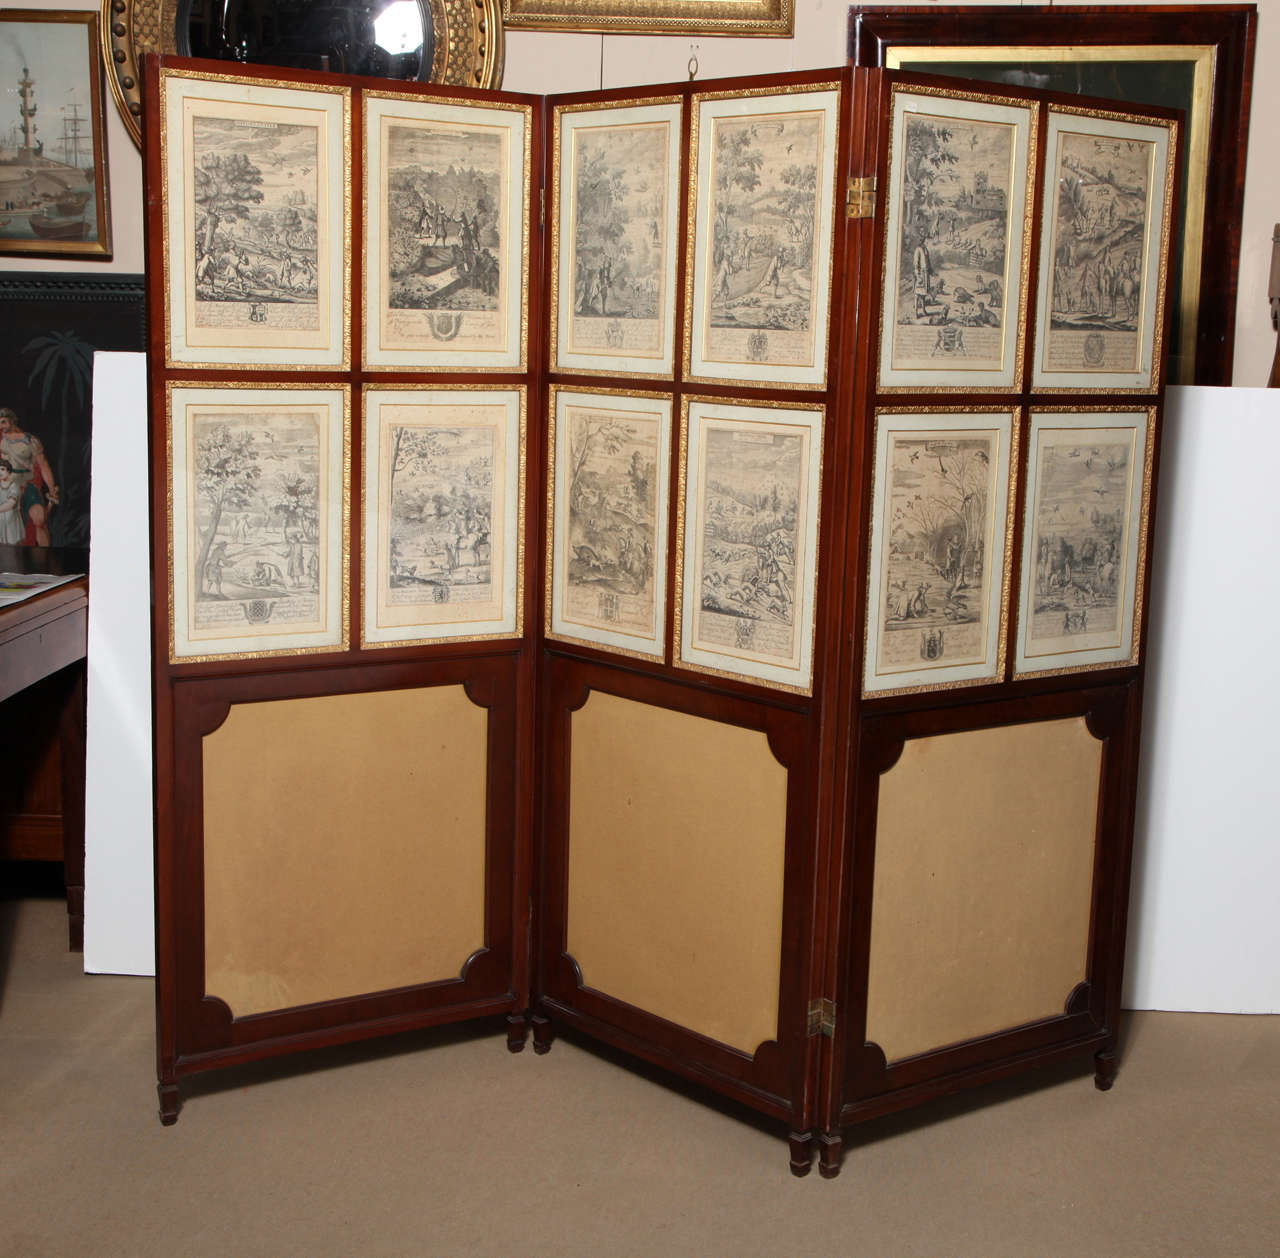 Pair of Three Panel English Screens With Steel Engravings of Hunting Scenes